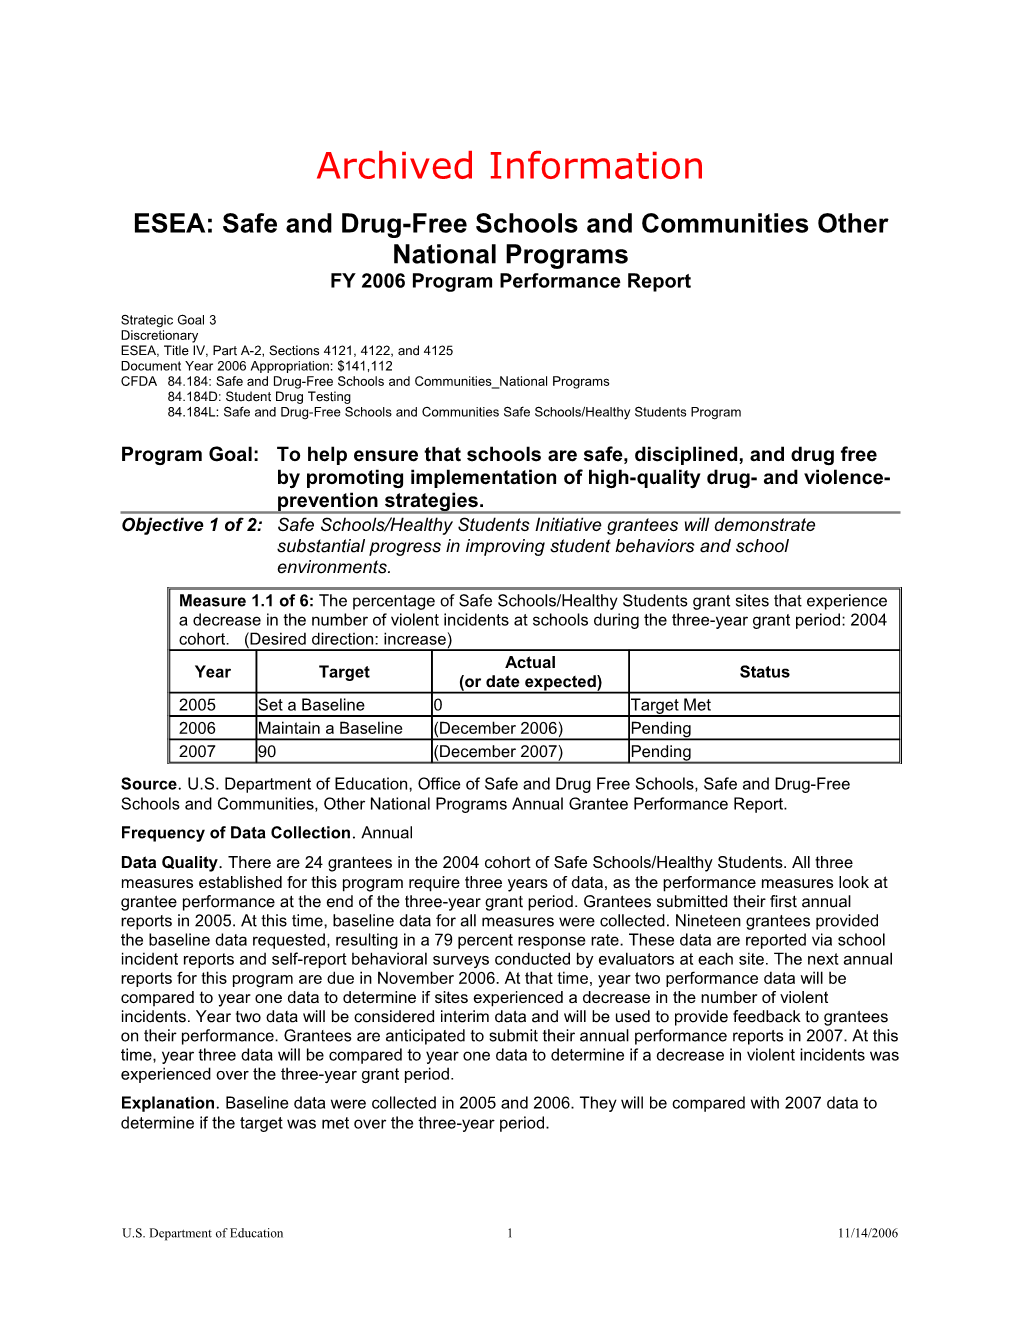 Archived: ESEA: Safe and Drug-Free Schools and Communities Other National Programs (MS Word)